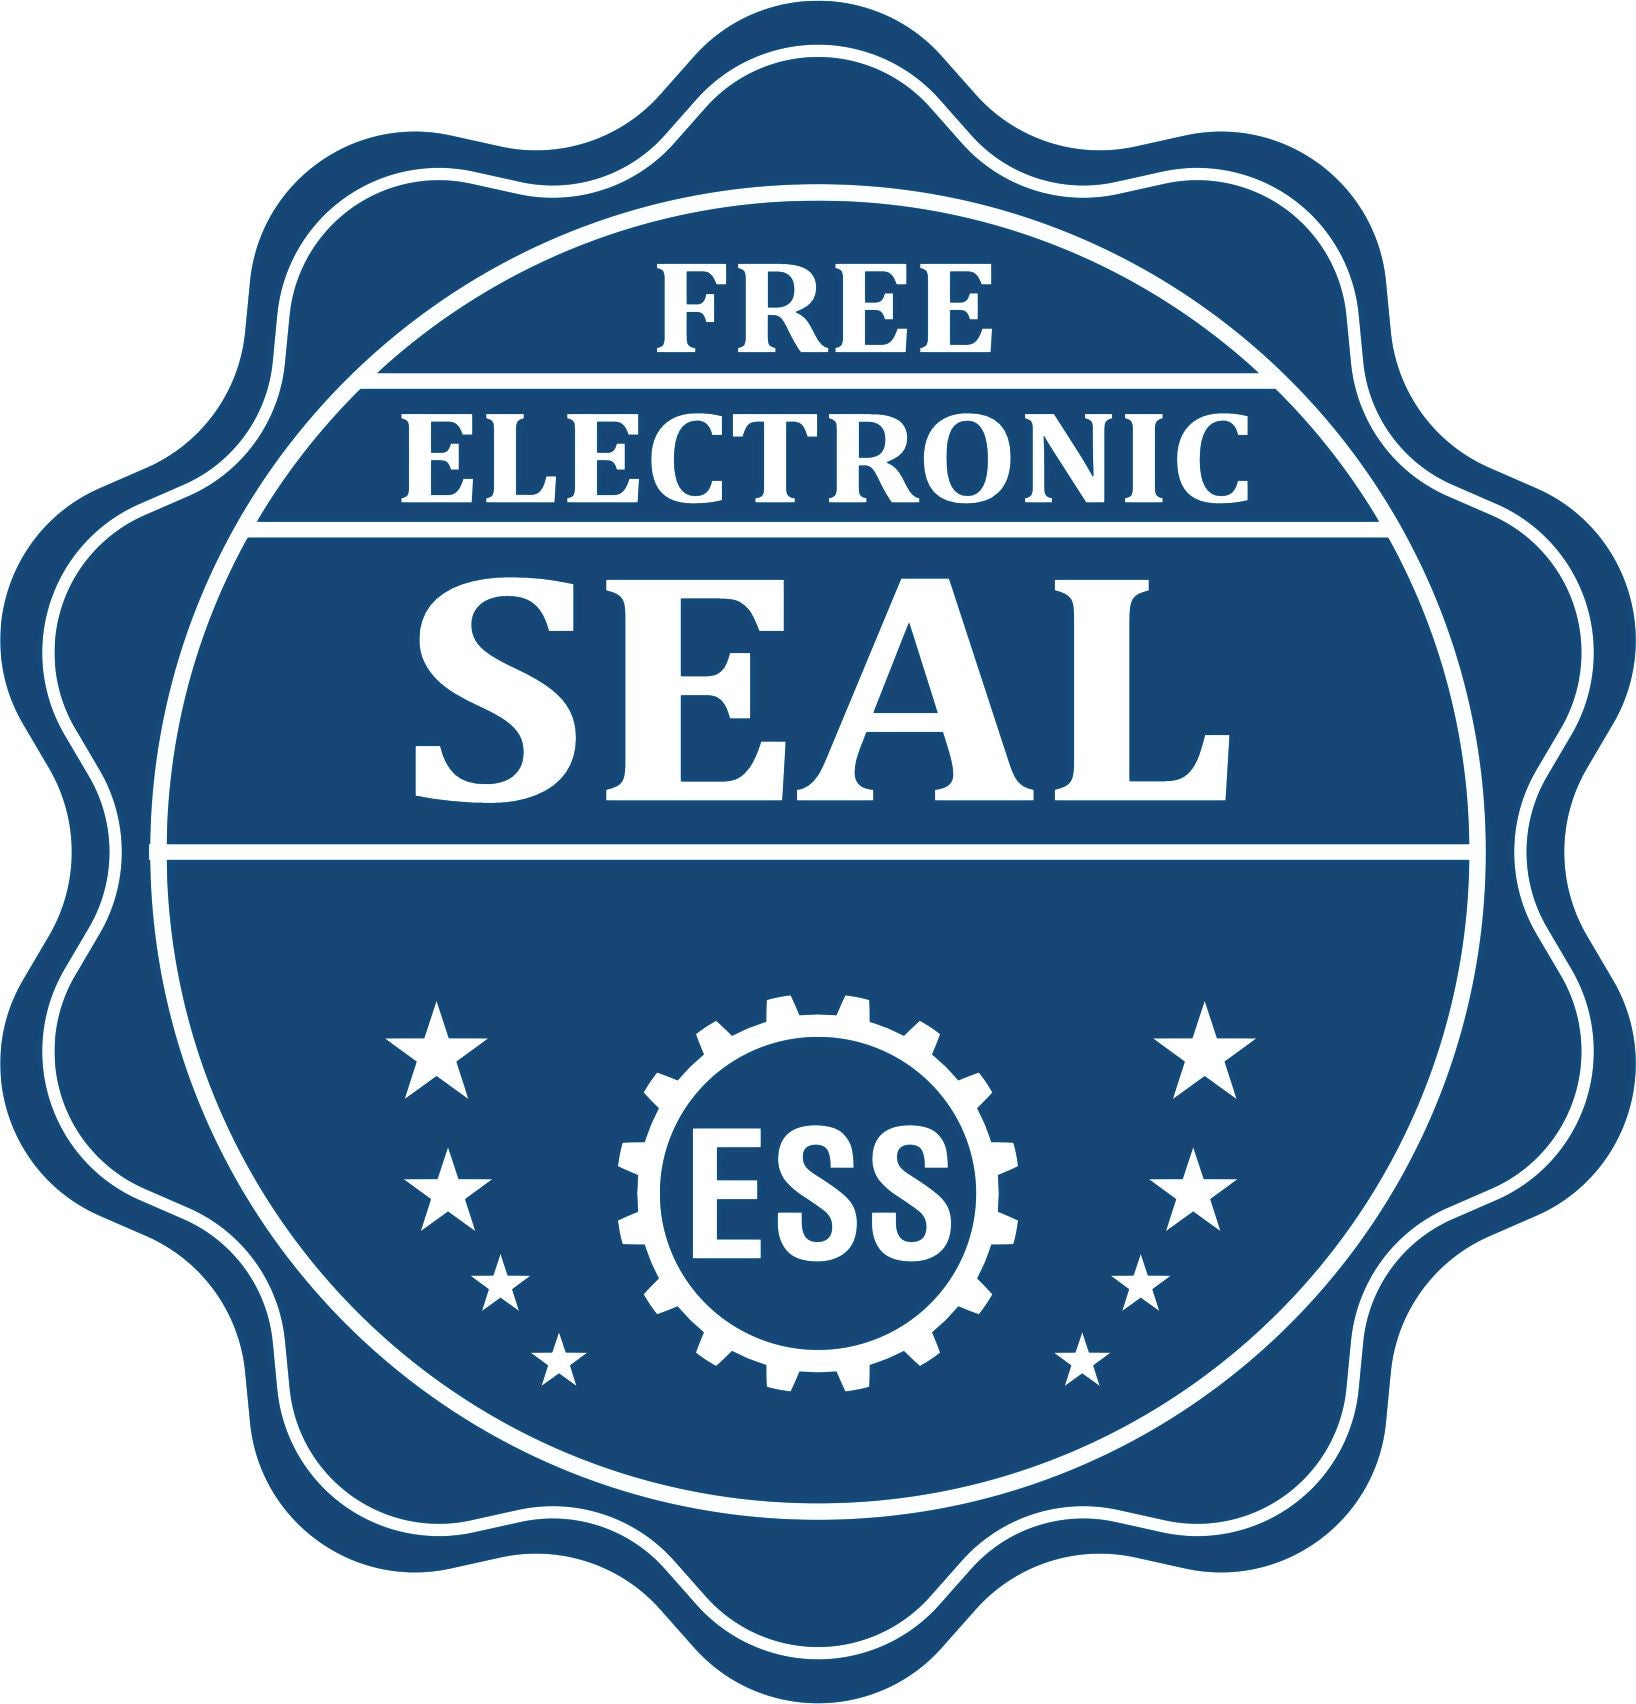 A badge showing a free electronic seal for the Slim Pre-Inked New Hampshire Landscape Architect Seal Stamp with stars and the ESS gear on the emblem.